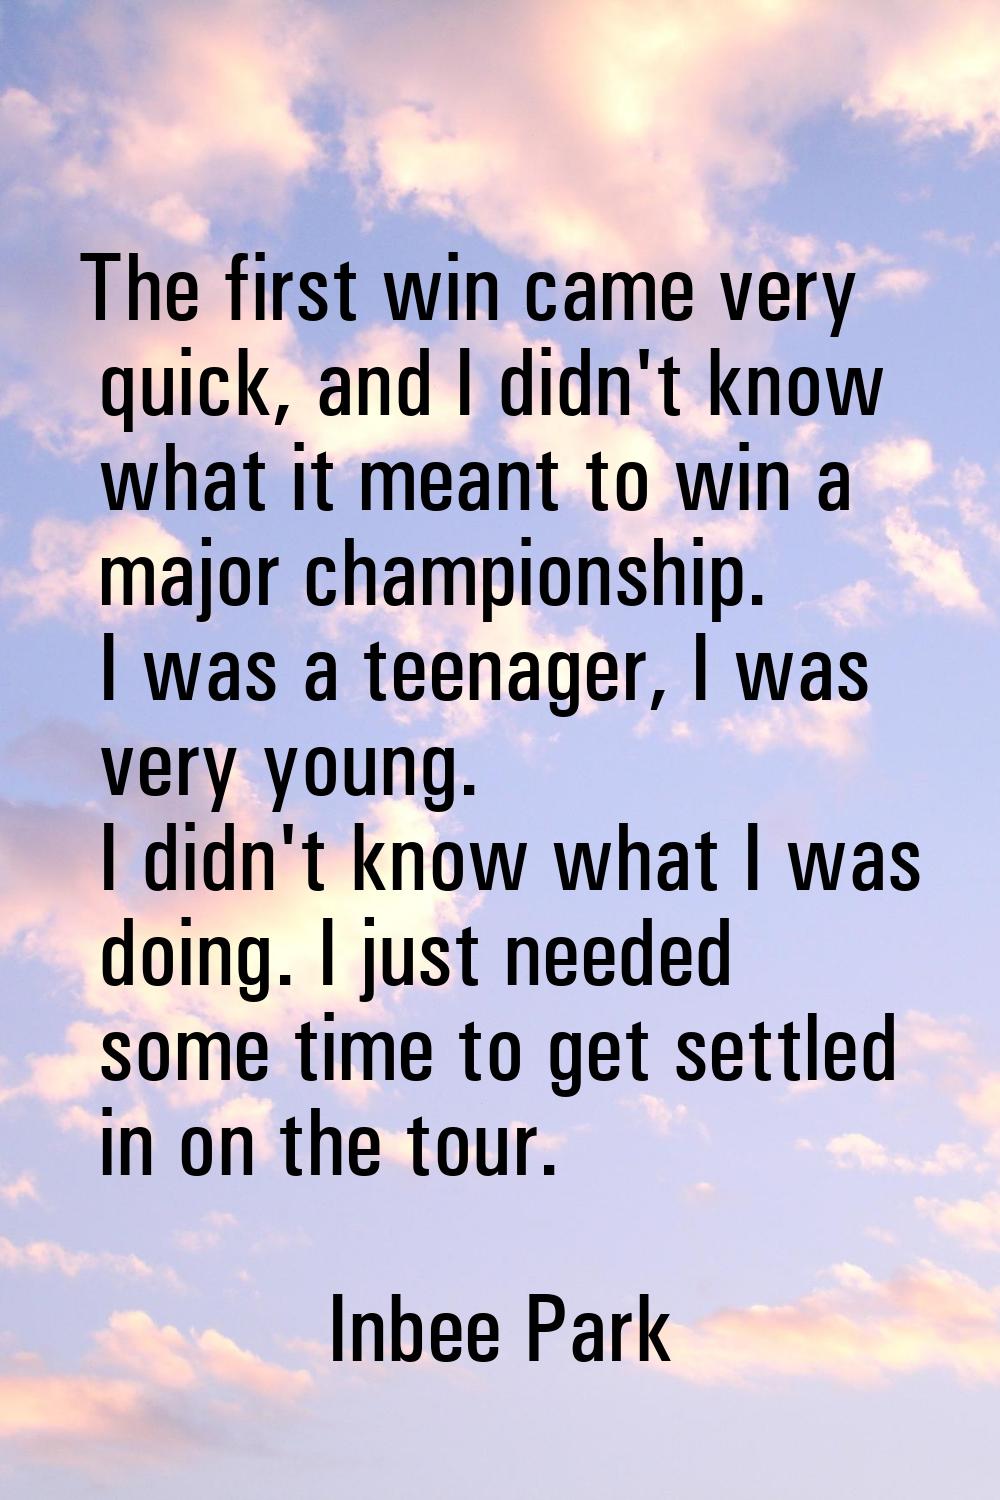 The first win came very quick, and I didn't know what it meant to win a major championship. I was a